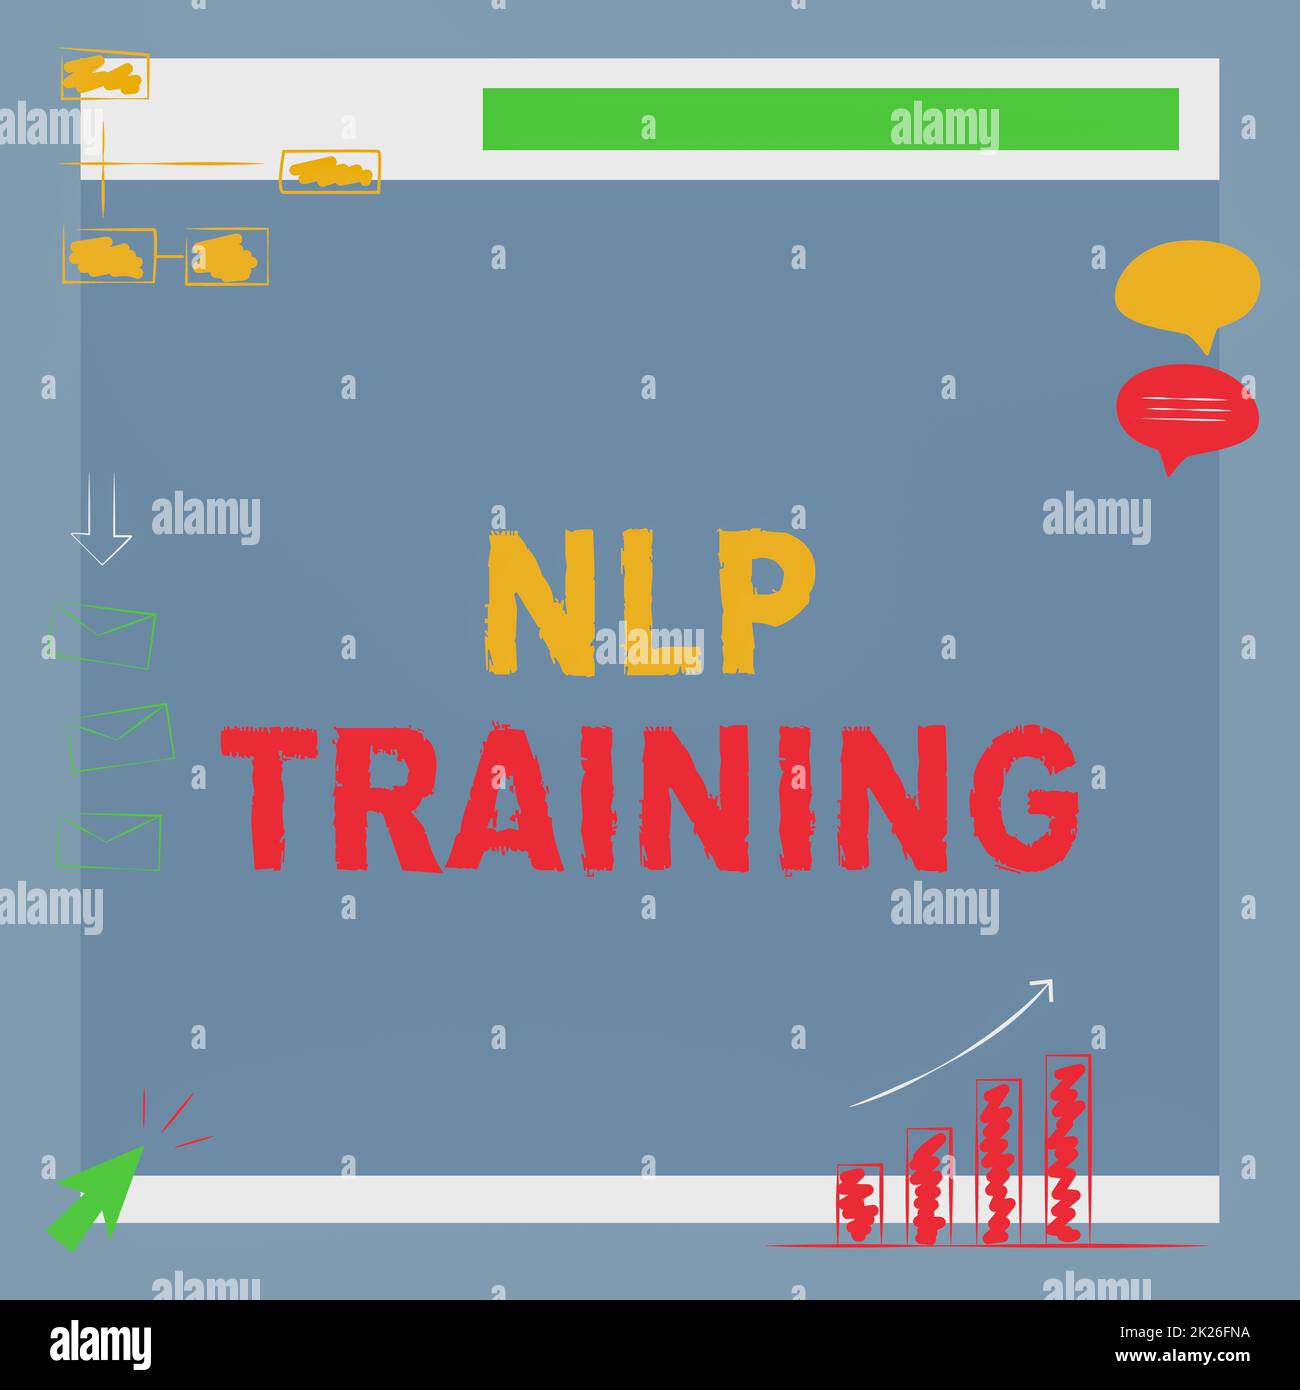 Conceptual caption Nlp Training. Concept meaning words have power approach includes seminar, coaching, training, and advice Illustration Of Board Receiving Messages And Searching Improvements. Stock Photo